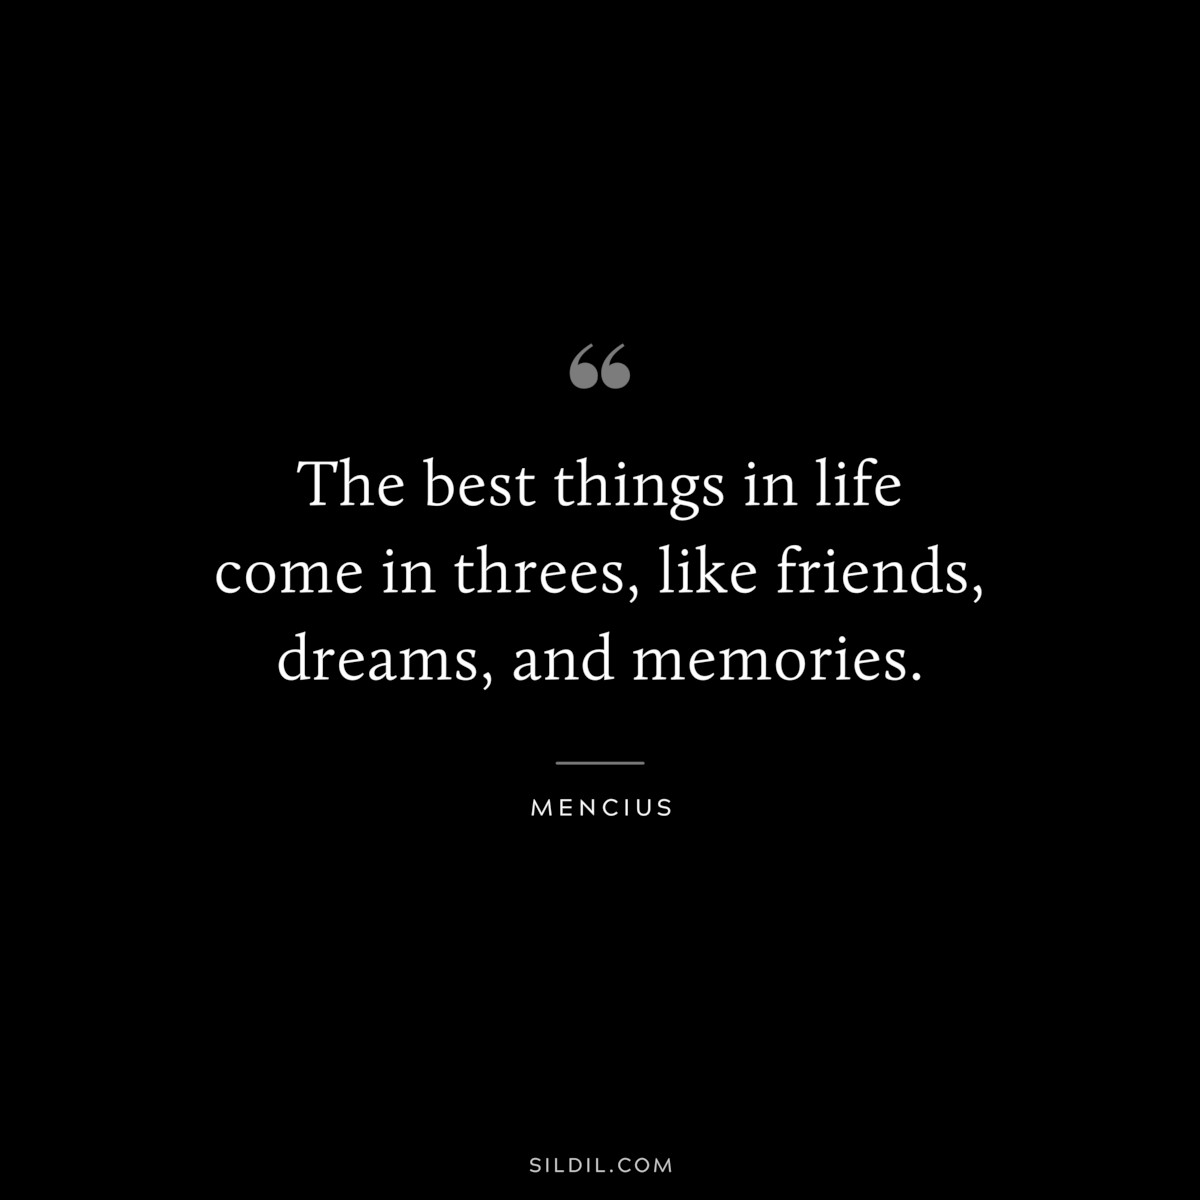 The best things in life come in threes, like friends, dreams, and memories. ― Mencius